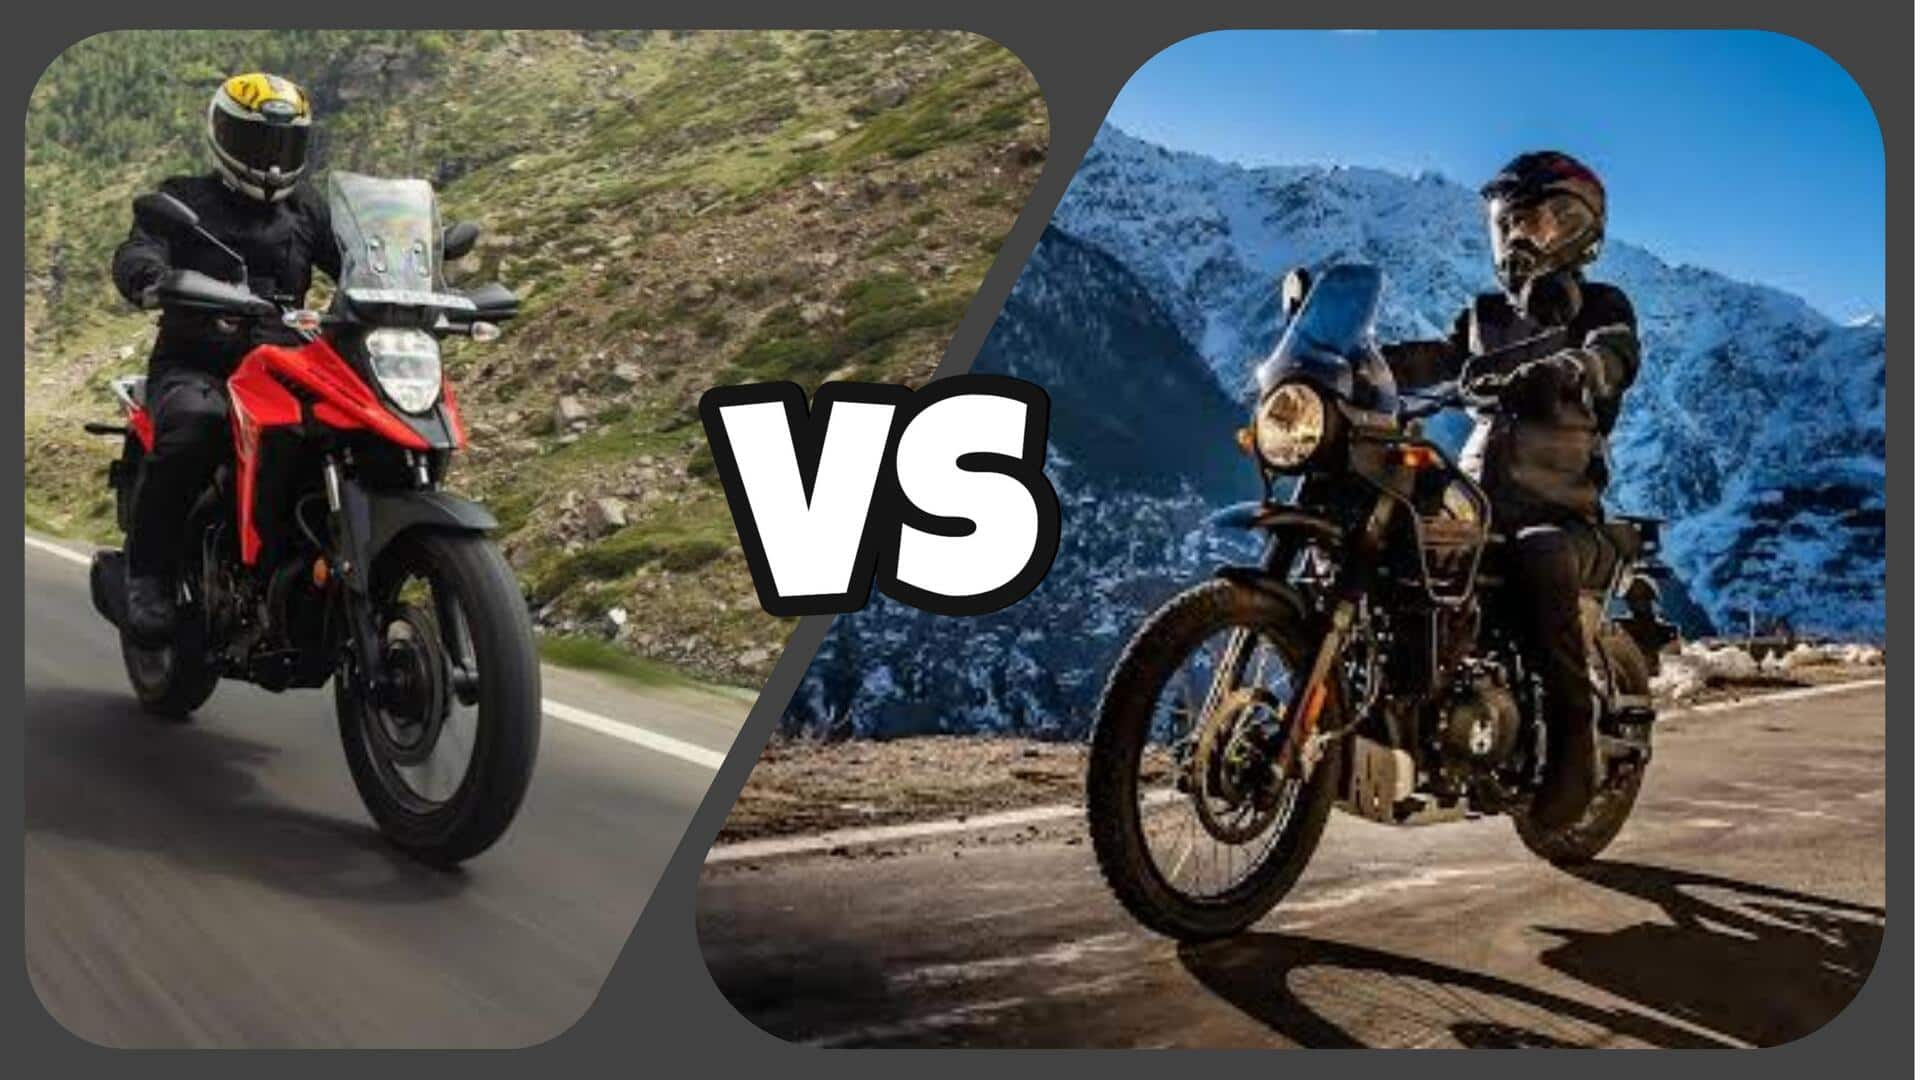 Is Suzuki V-Strom SX better than Royal Enfield Himalayan